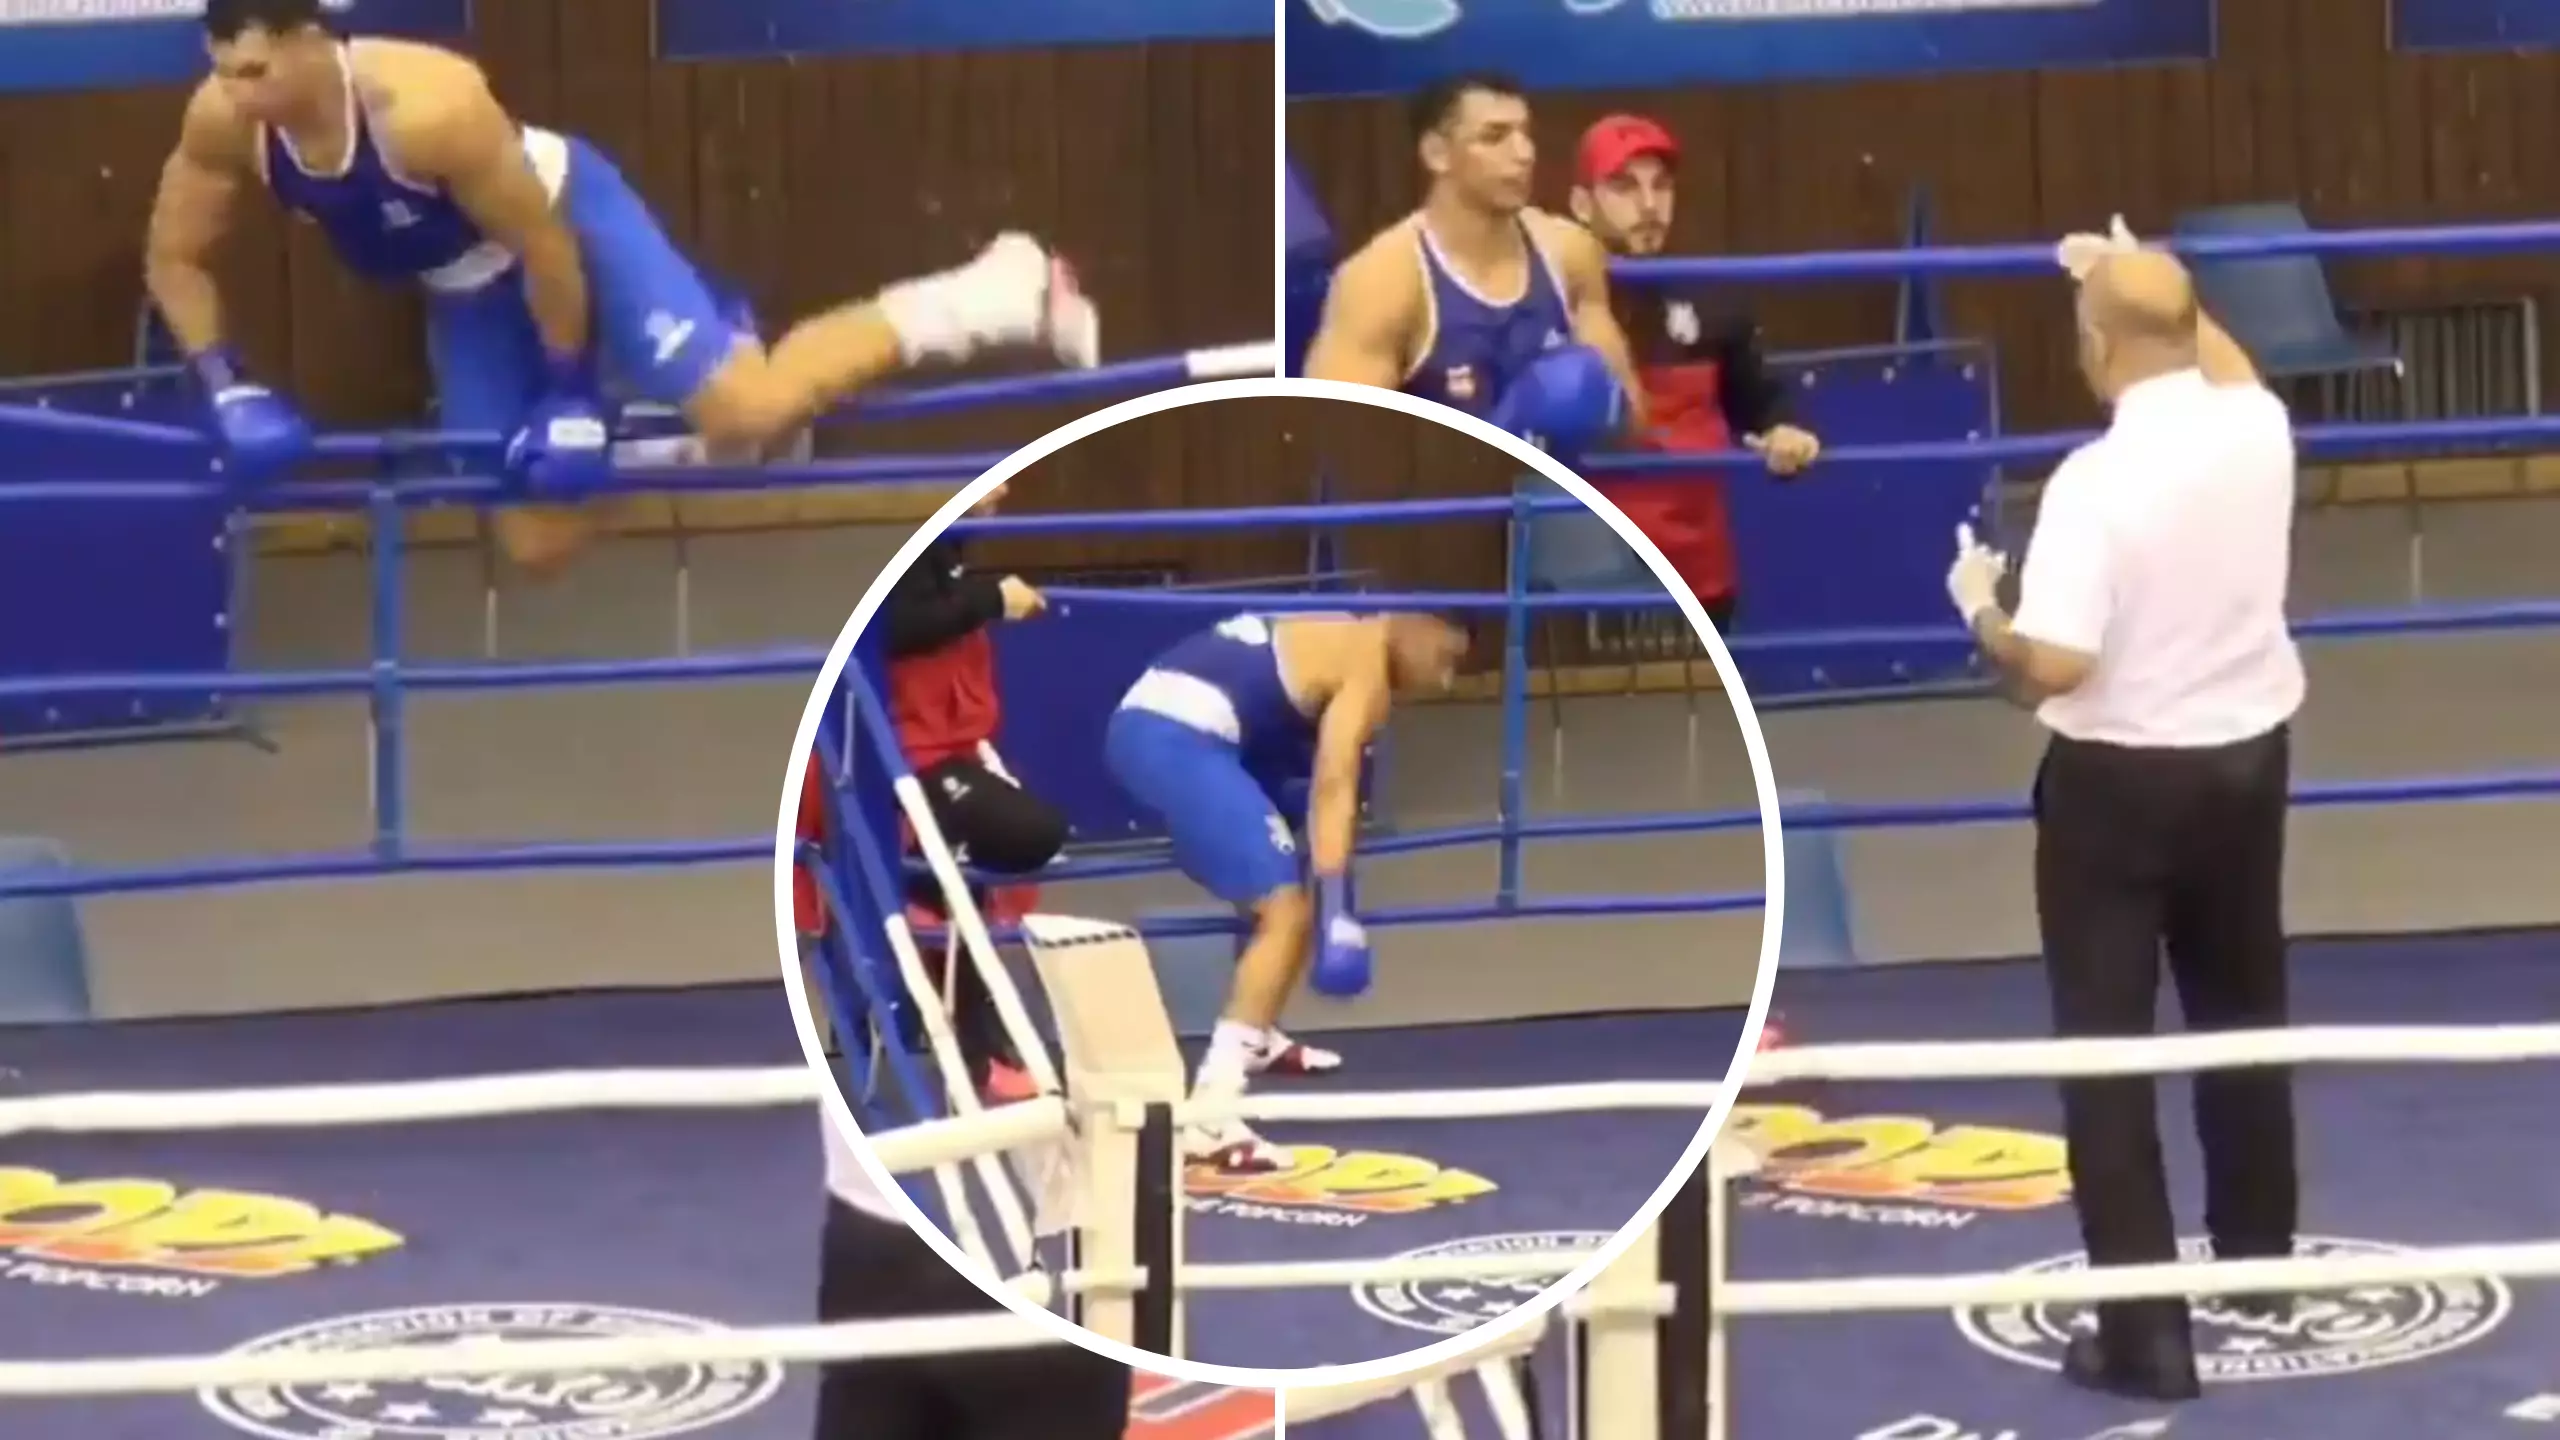 Referee Humbles Boxer By Forcing Him To Re-Enter The Ring